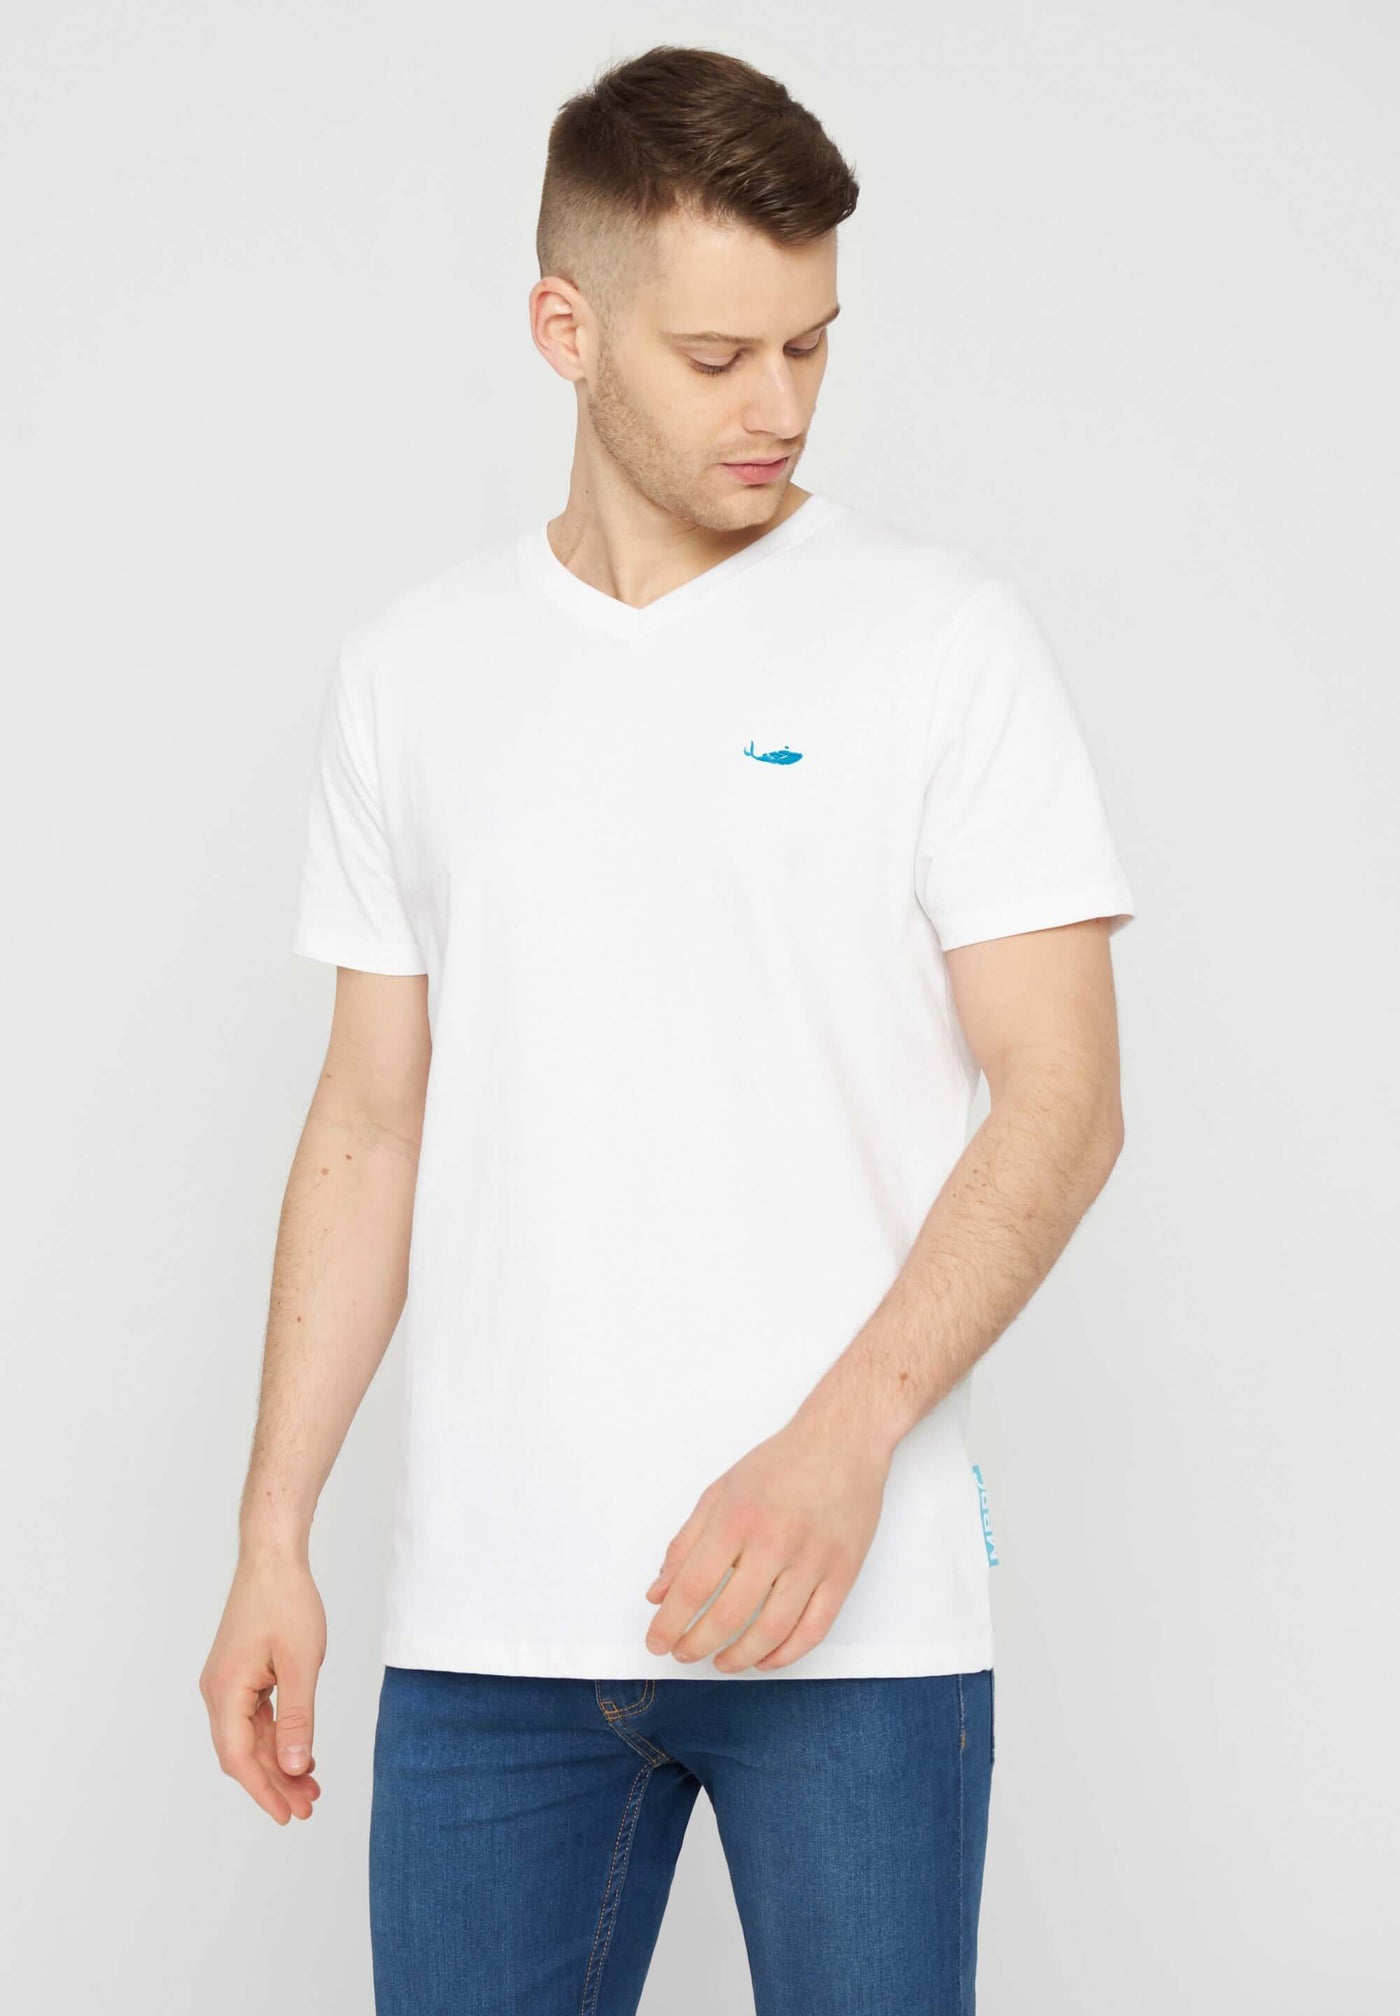 MBRC MEN SUSTAINABLE WHITE T-SHIRT "LIGHT BLUE LOGO" - FRONTAL VIEW